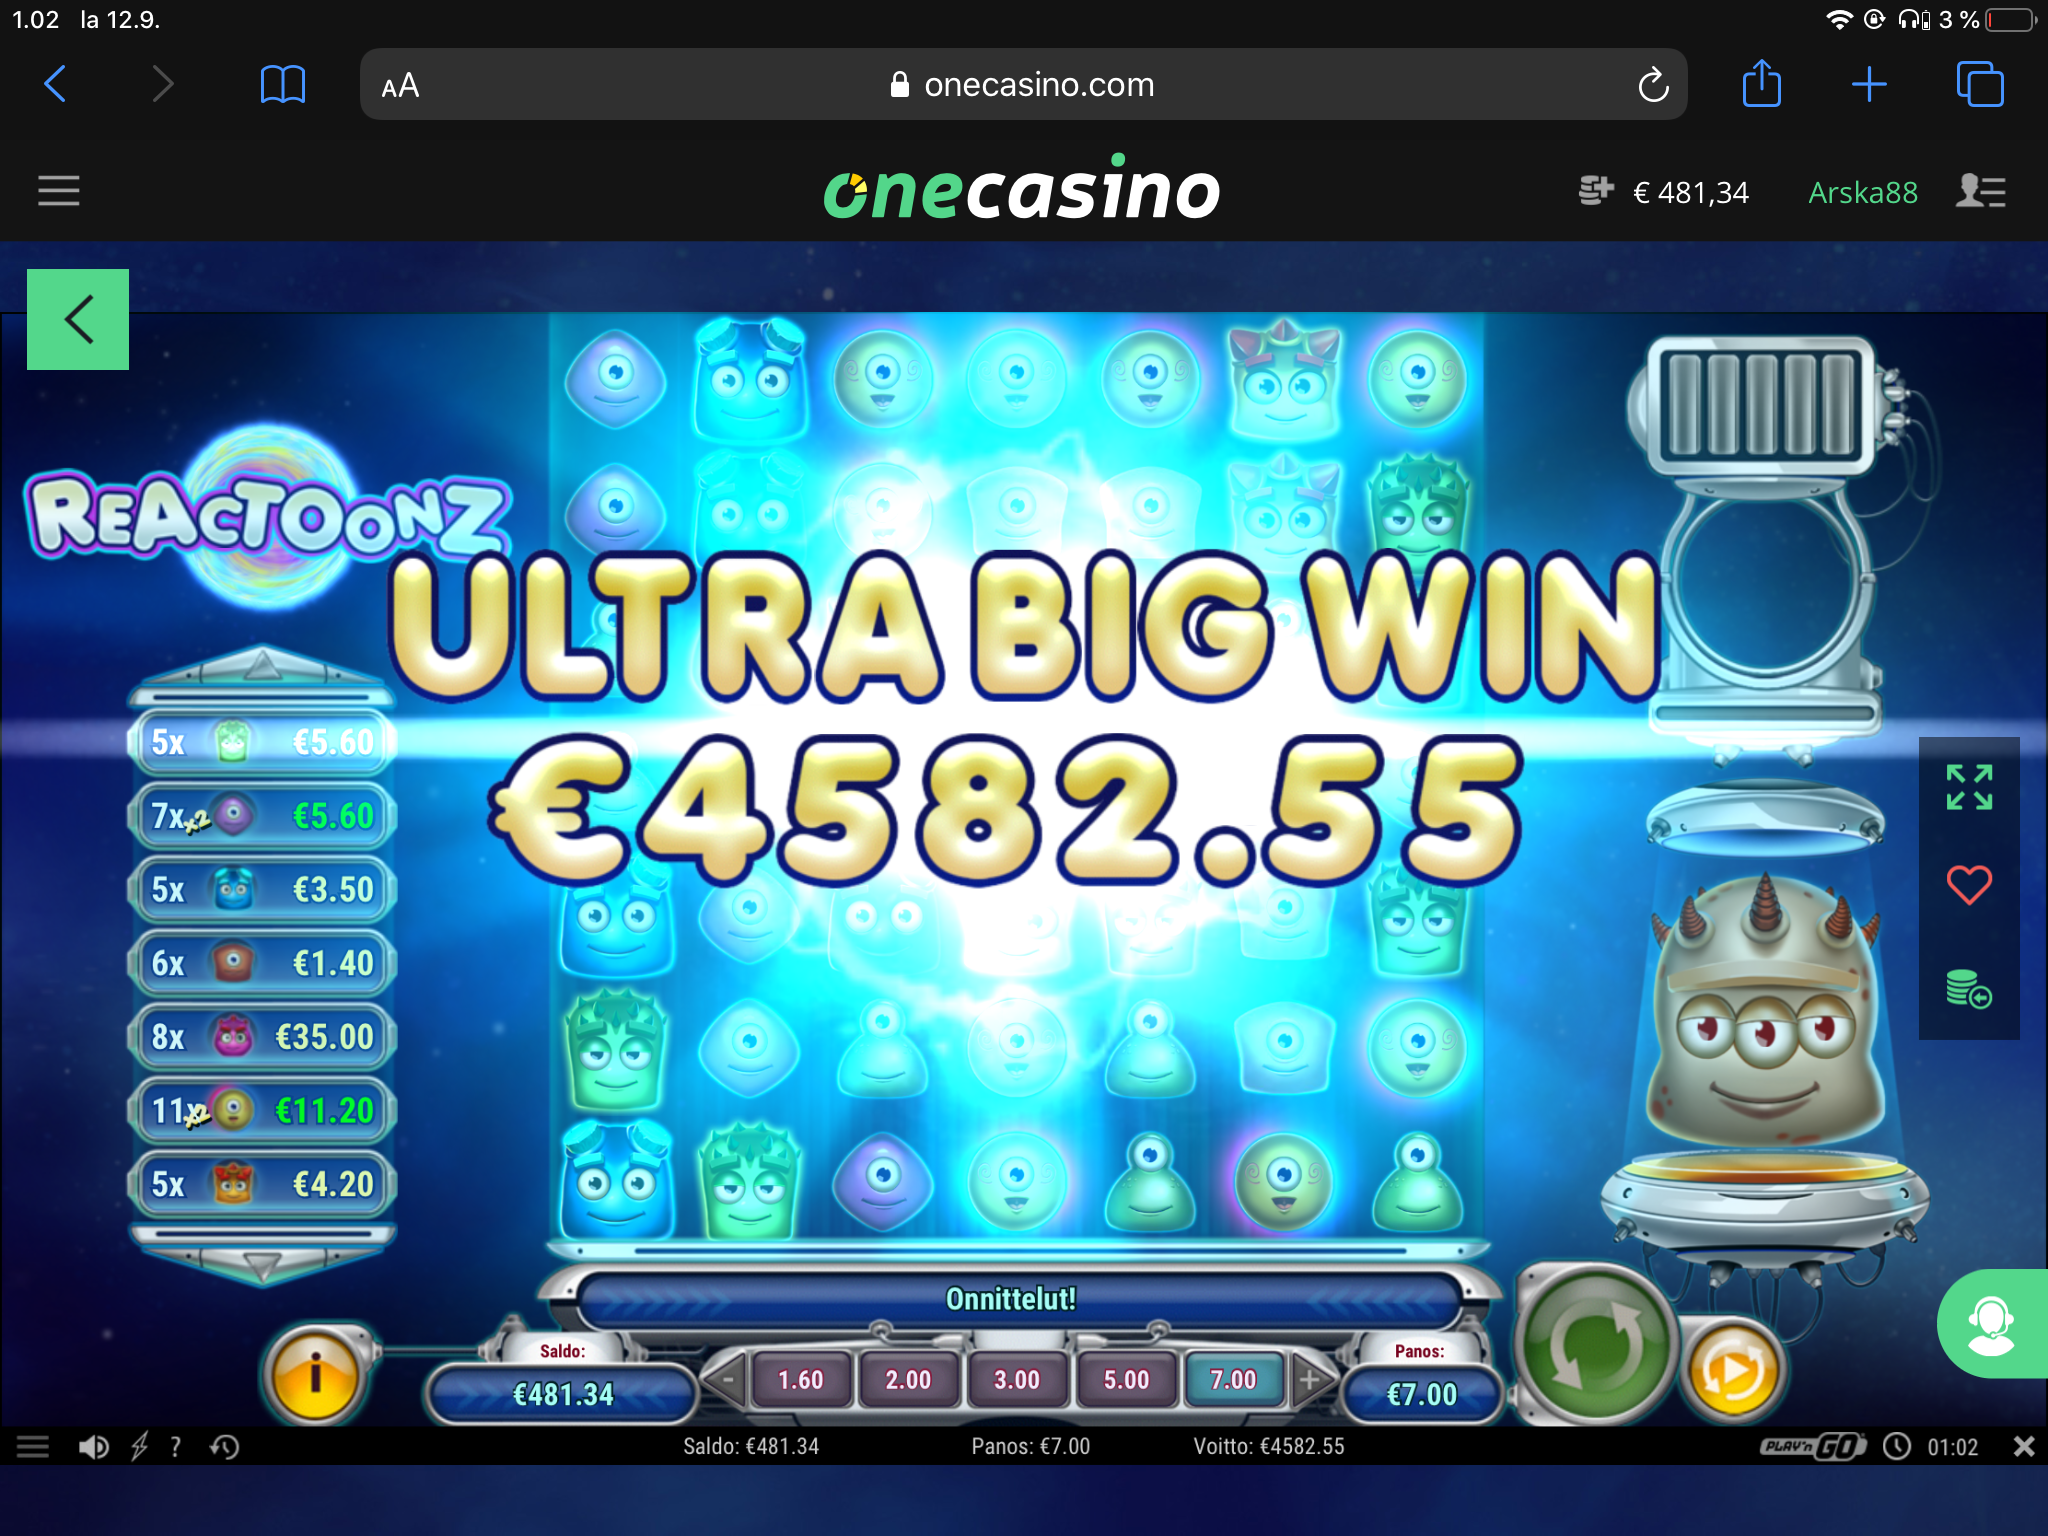 One Casino undefined iso voitto